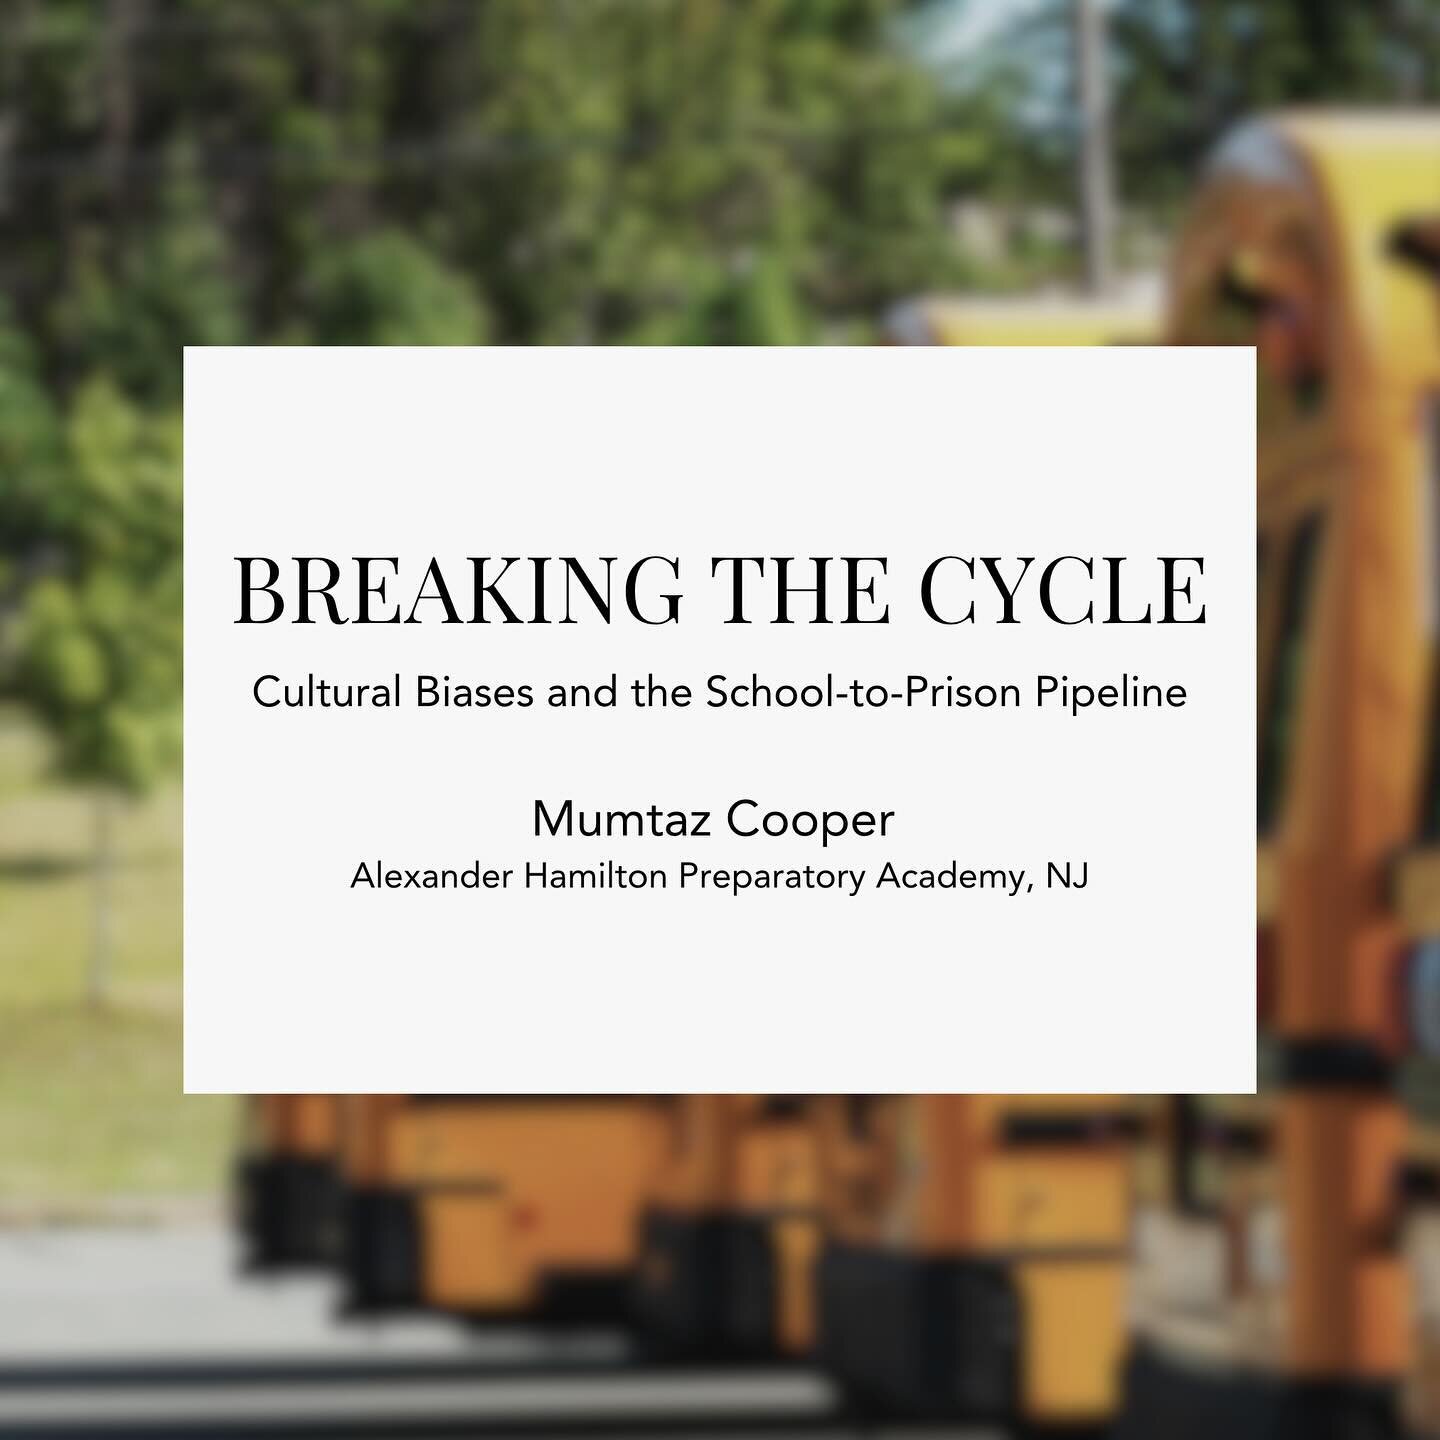 How do we approach the school-to-prison pipeline? Mumtaz illustrates this thought-provoking concept in her article. Read it in our February issue at culturator.org/issues 
.
.
.
#CulturatorCraftsChange